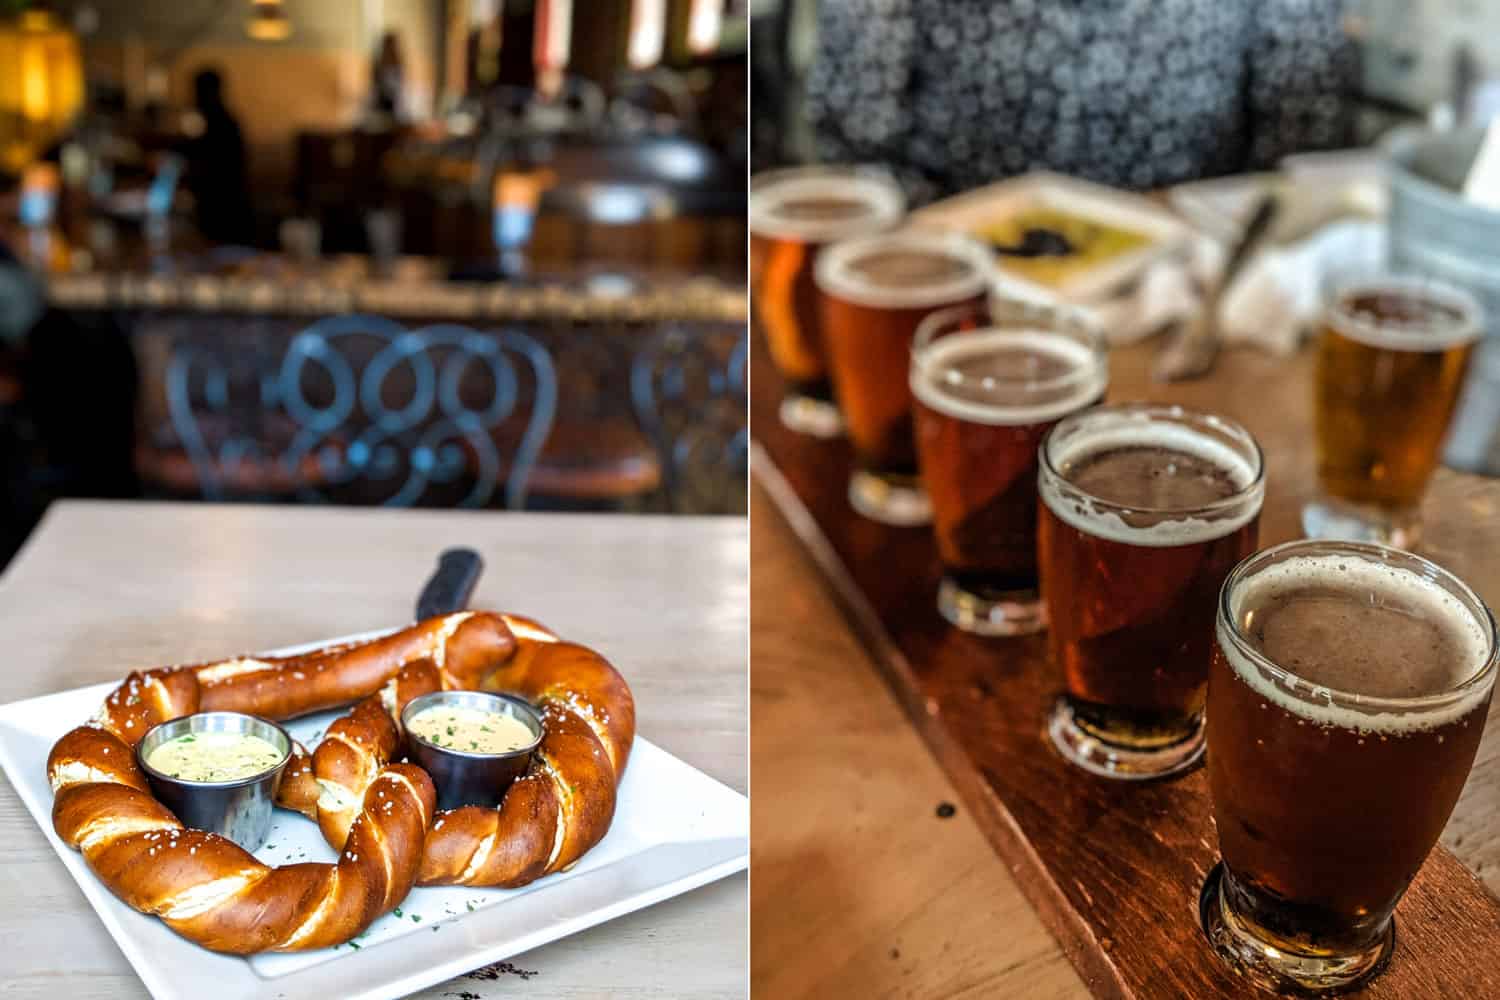 Pretzel and flight of beers at Red Car brewery in Torrance California